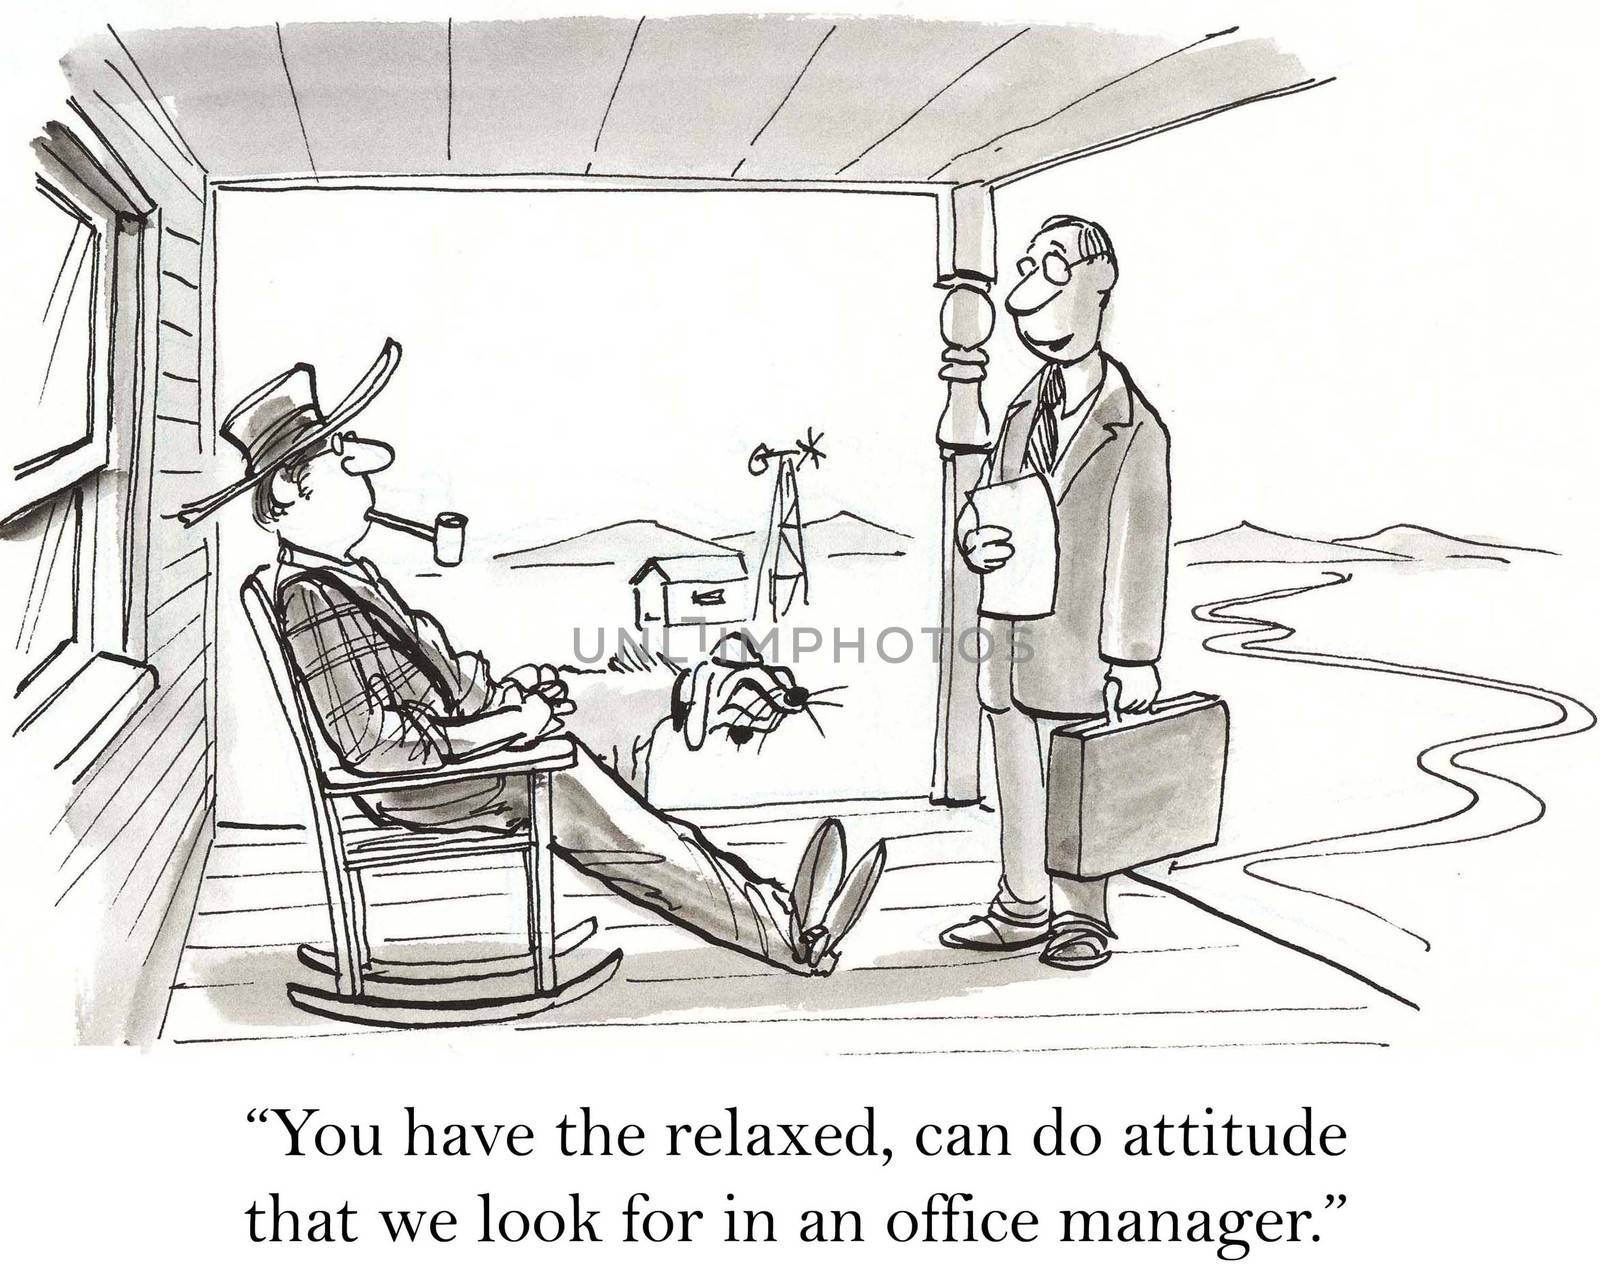 "You have the relaxed, can do attitude we look for in an office manager."